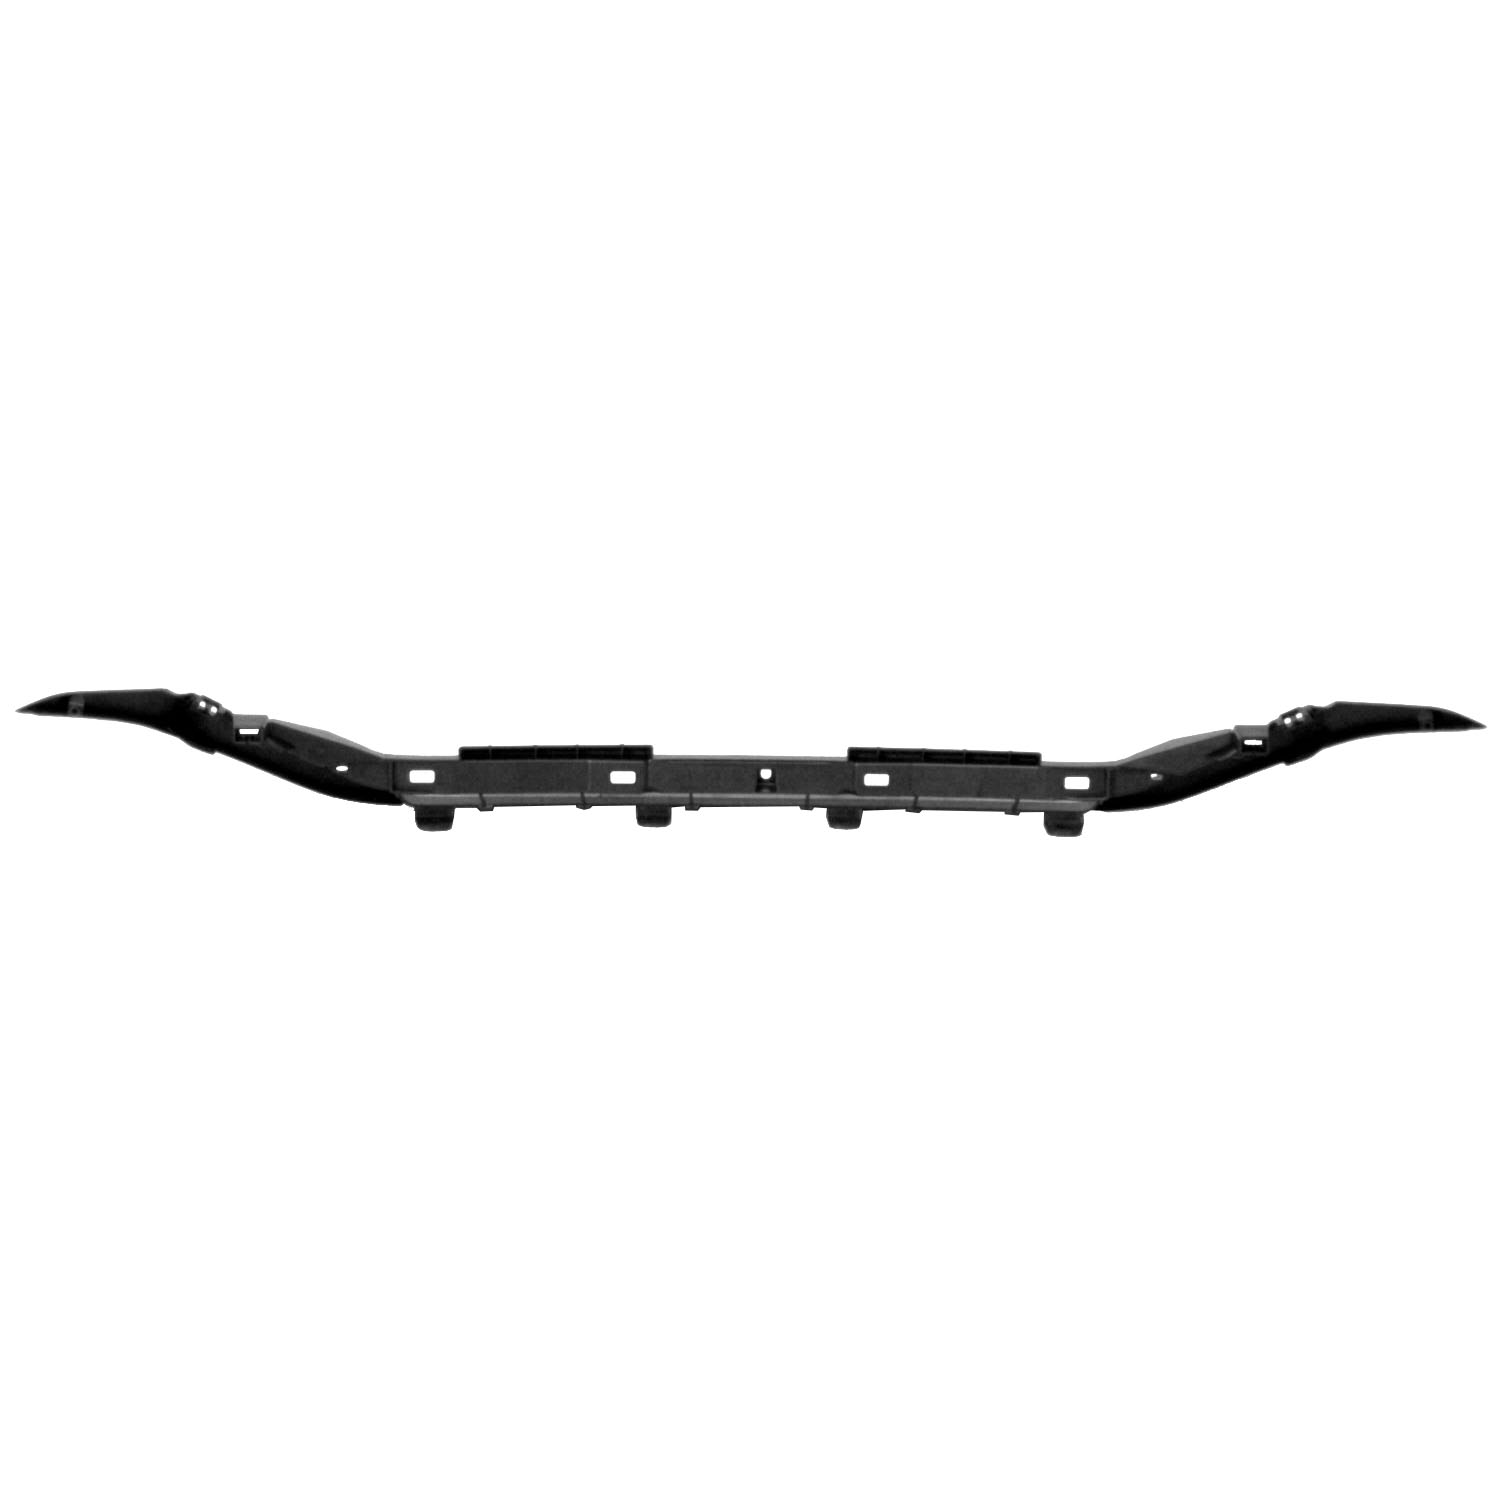 KAI New OEM Replacement Lower Grille Molding, Fits 2012-2014 Honda CRV - image 1 of 1